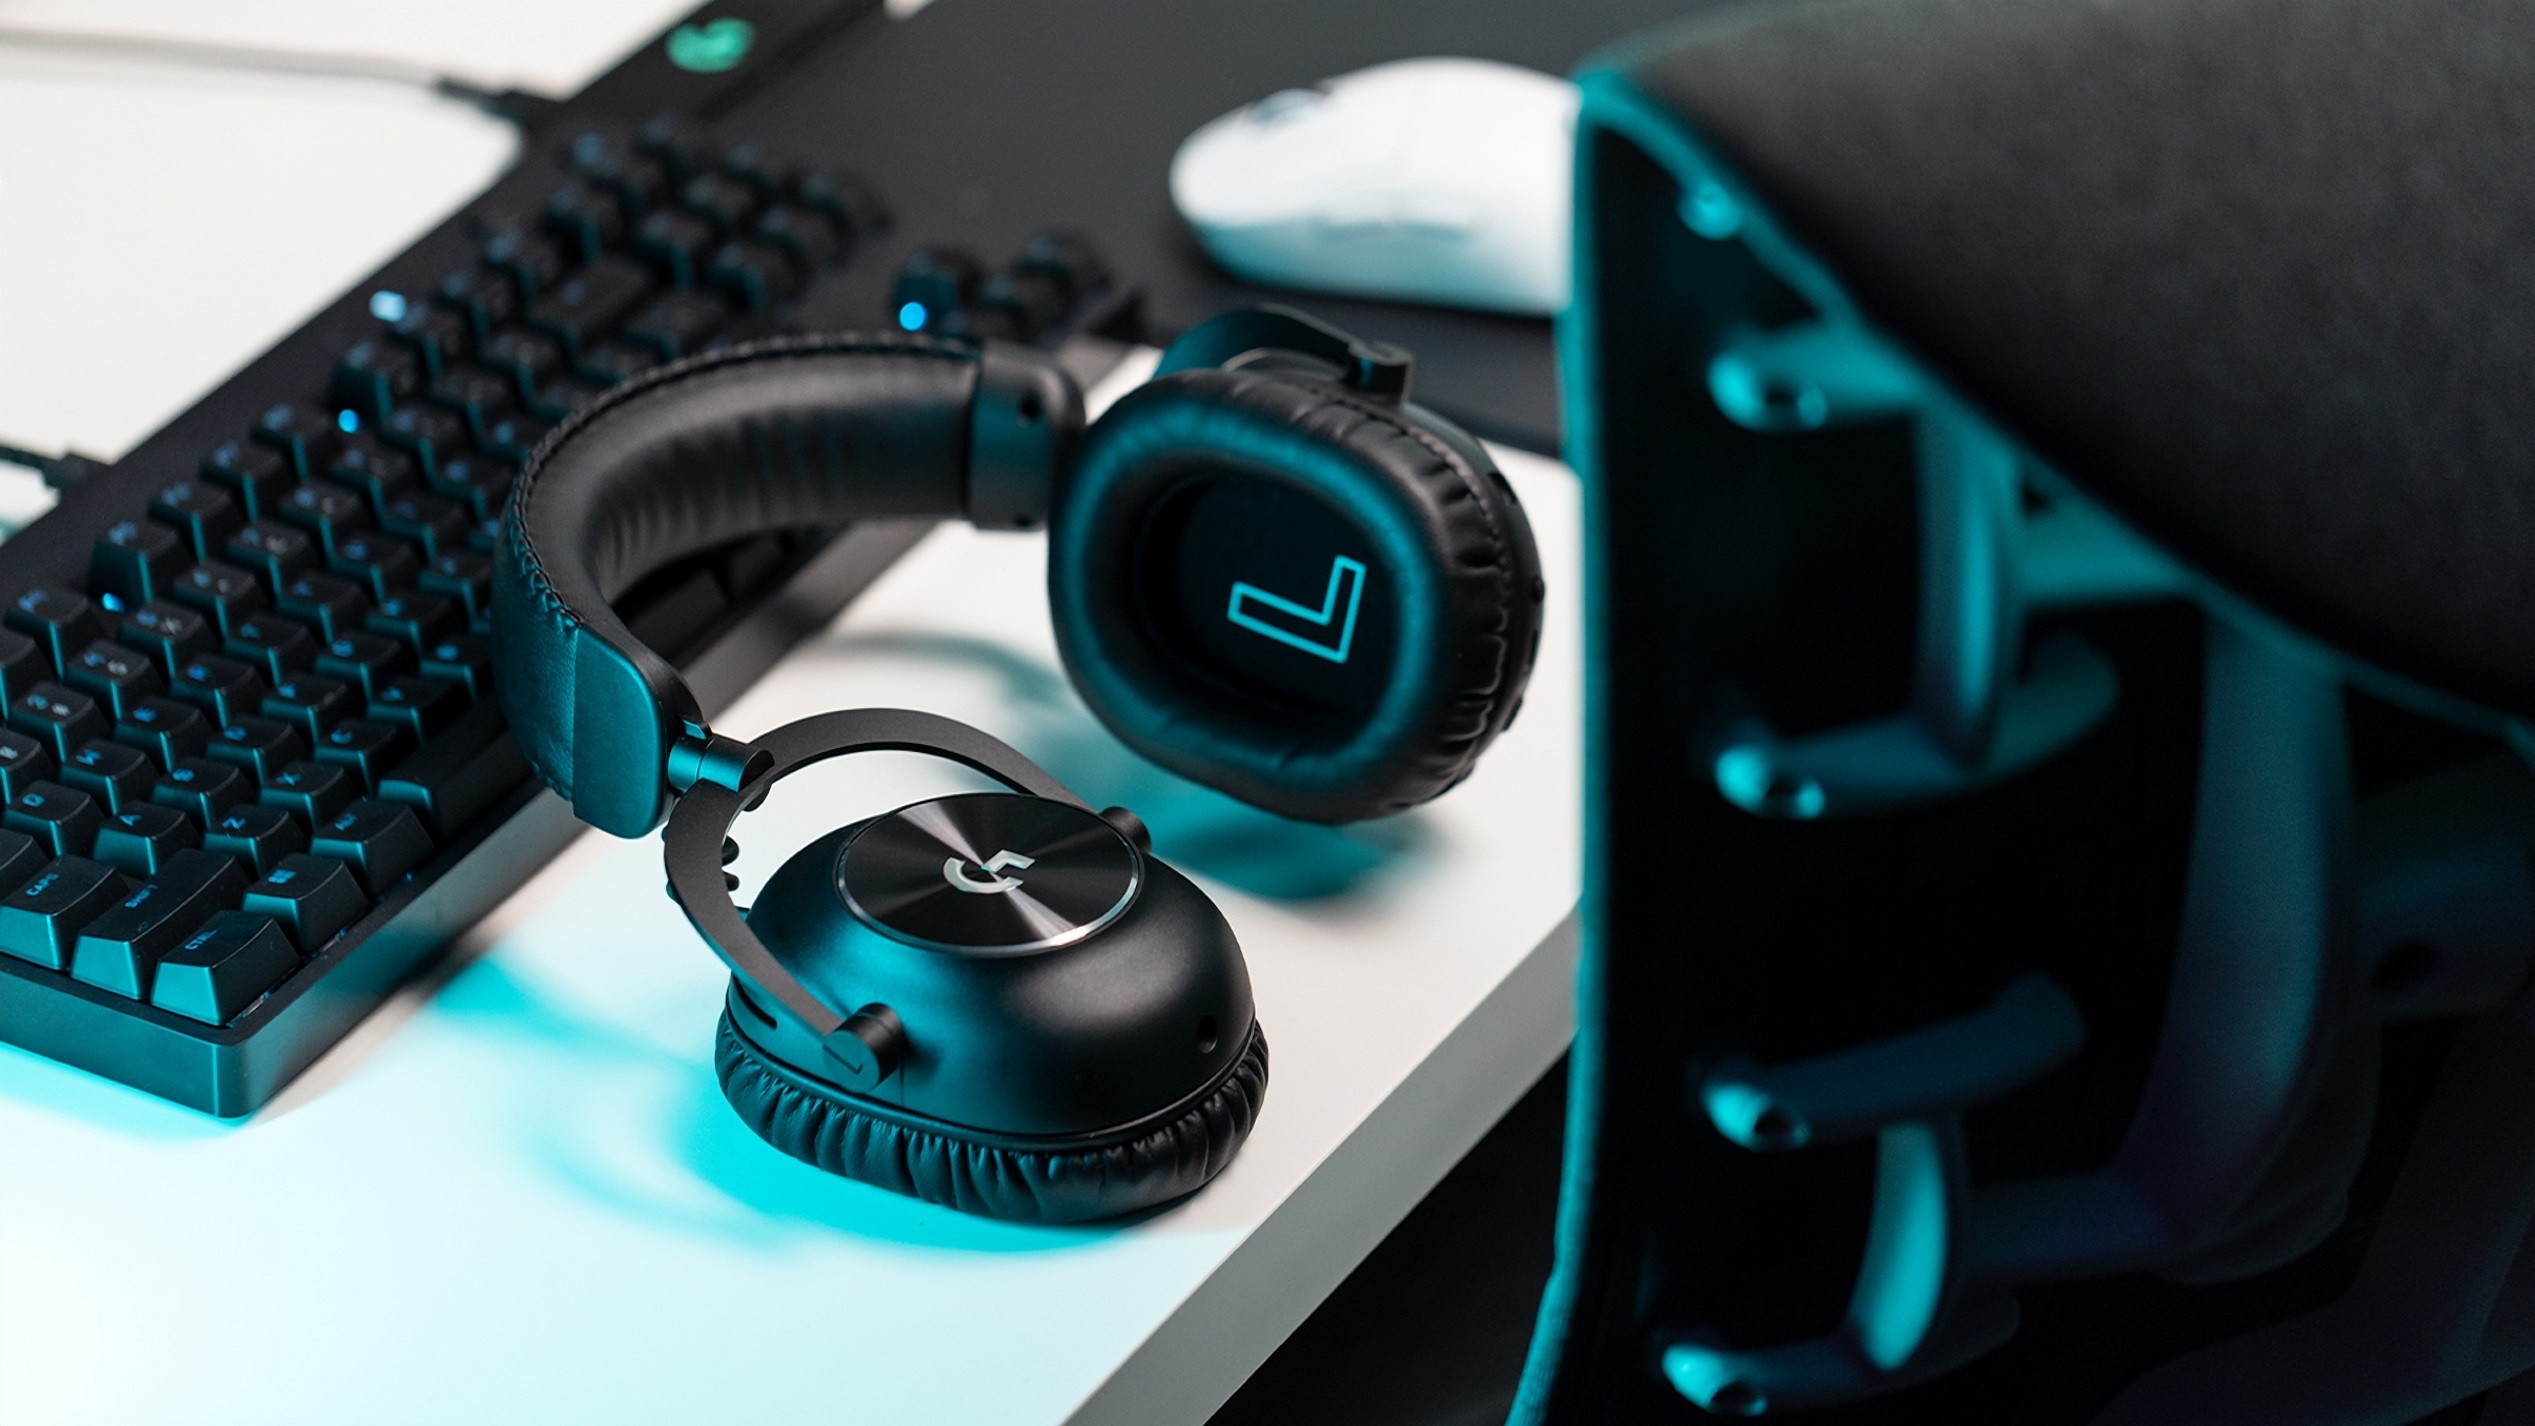 Logitech G Pro Gaming Headset Review